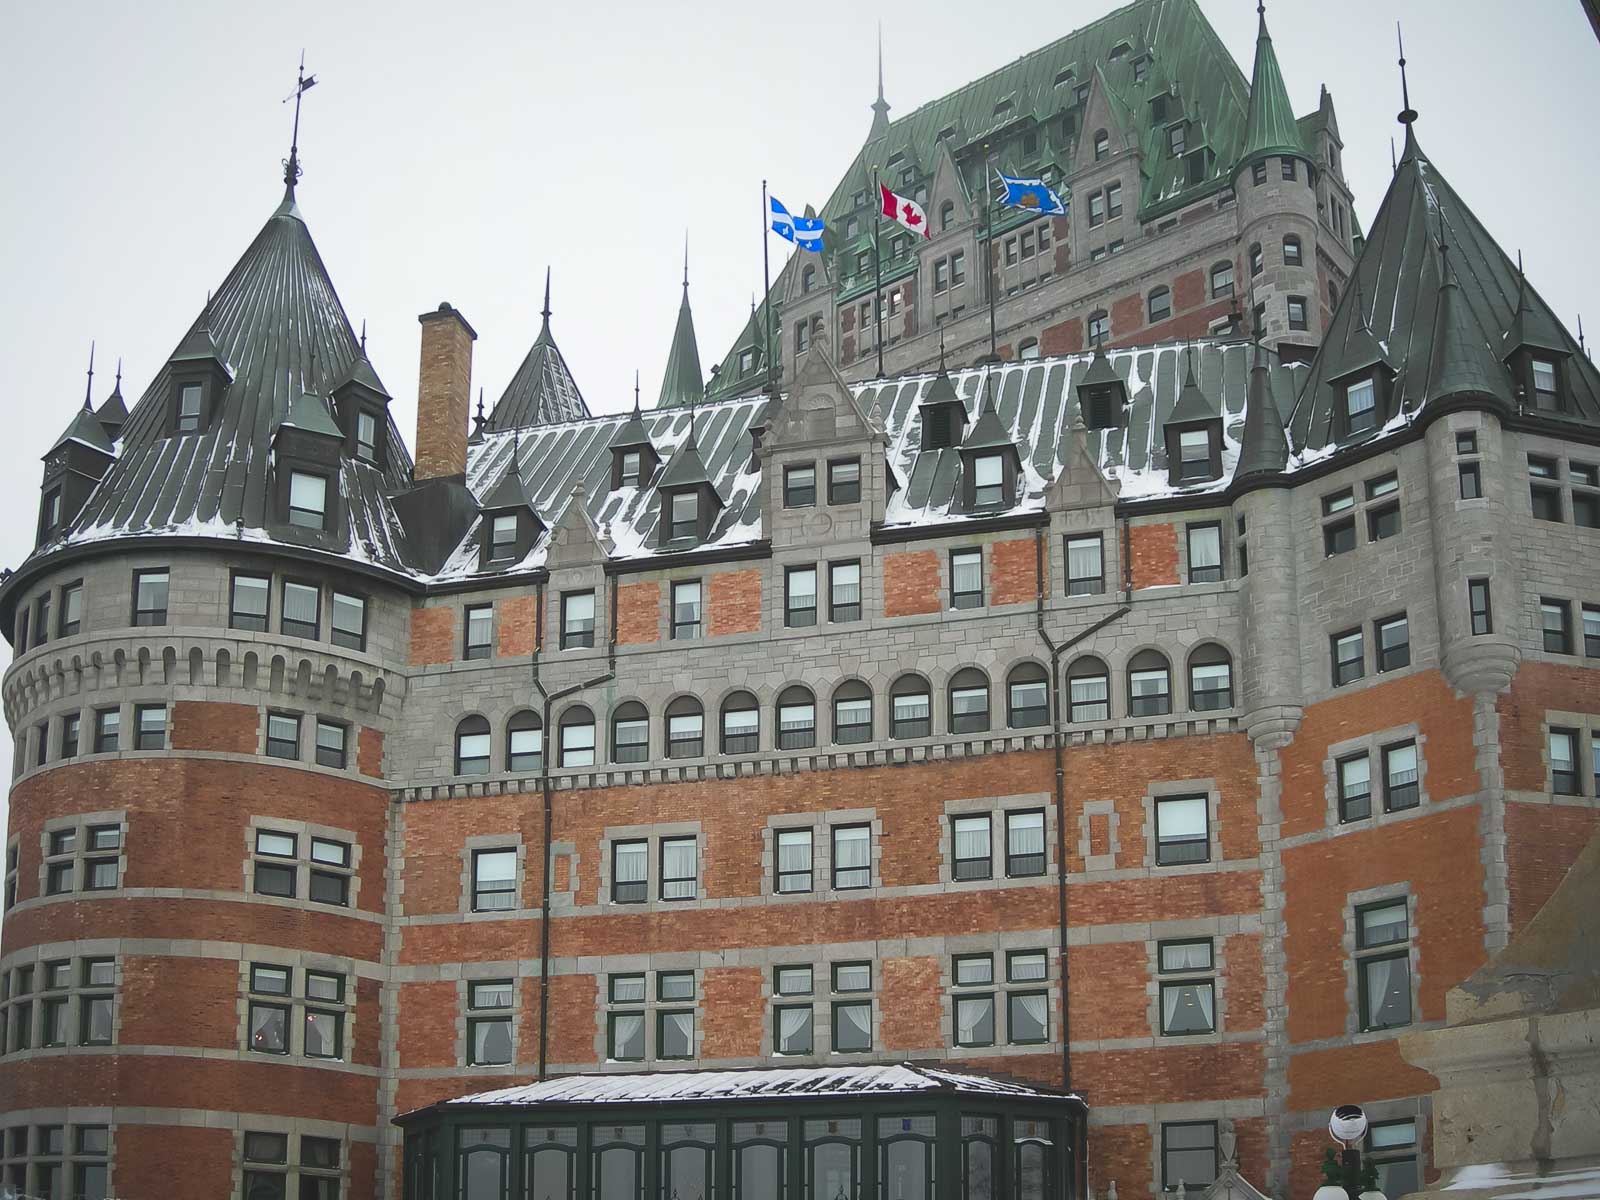 Things to do in Quebec City - The Chateau Frontenac in Quebec City